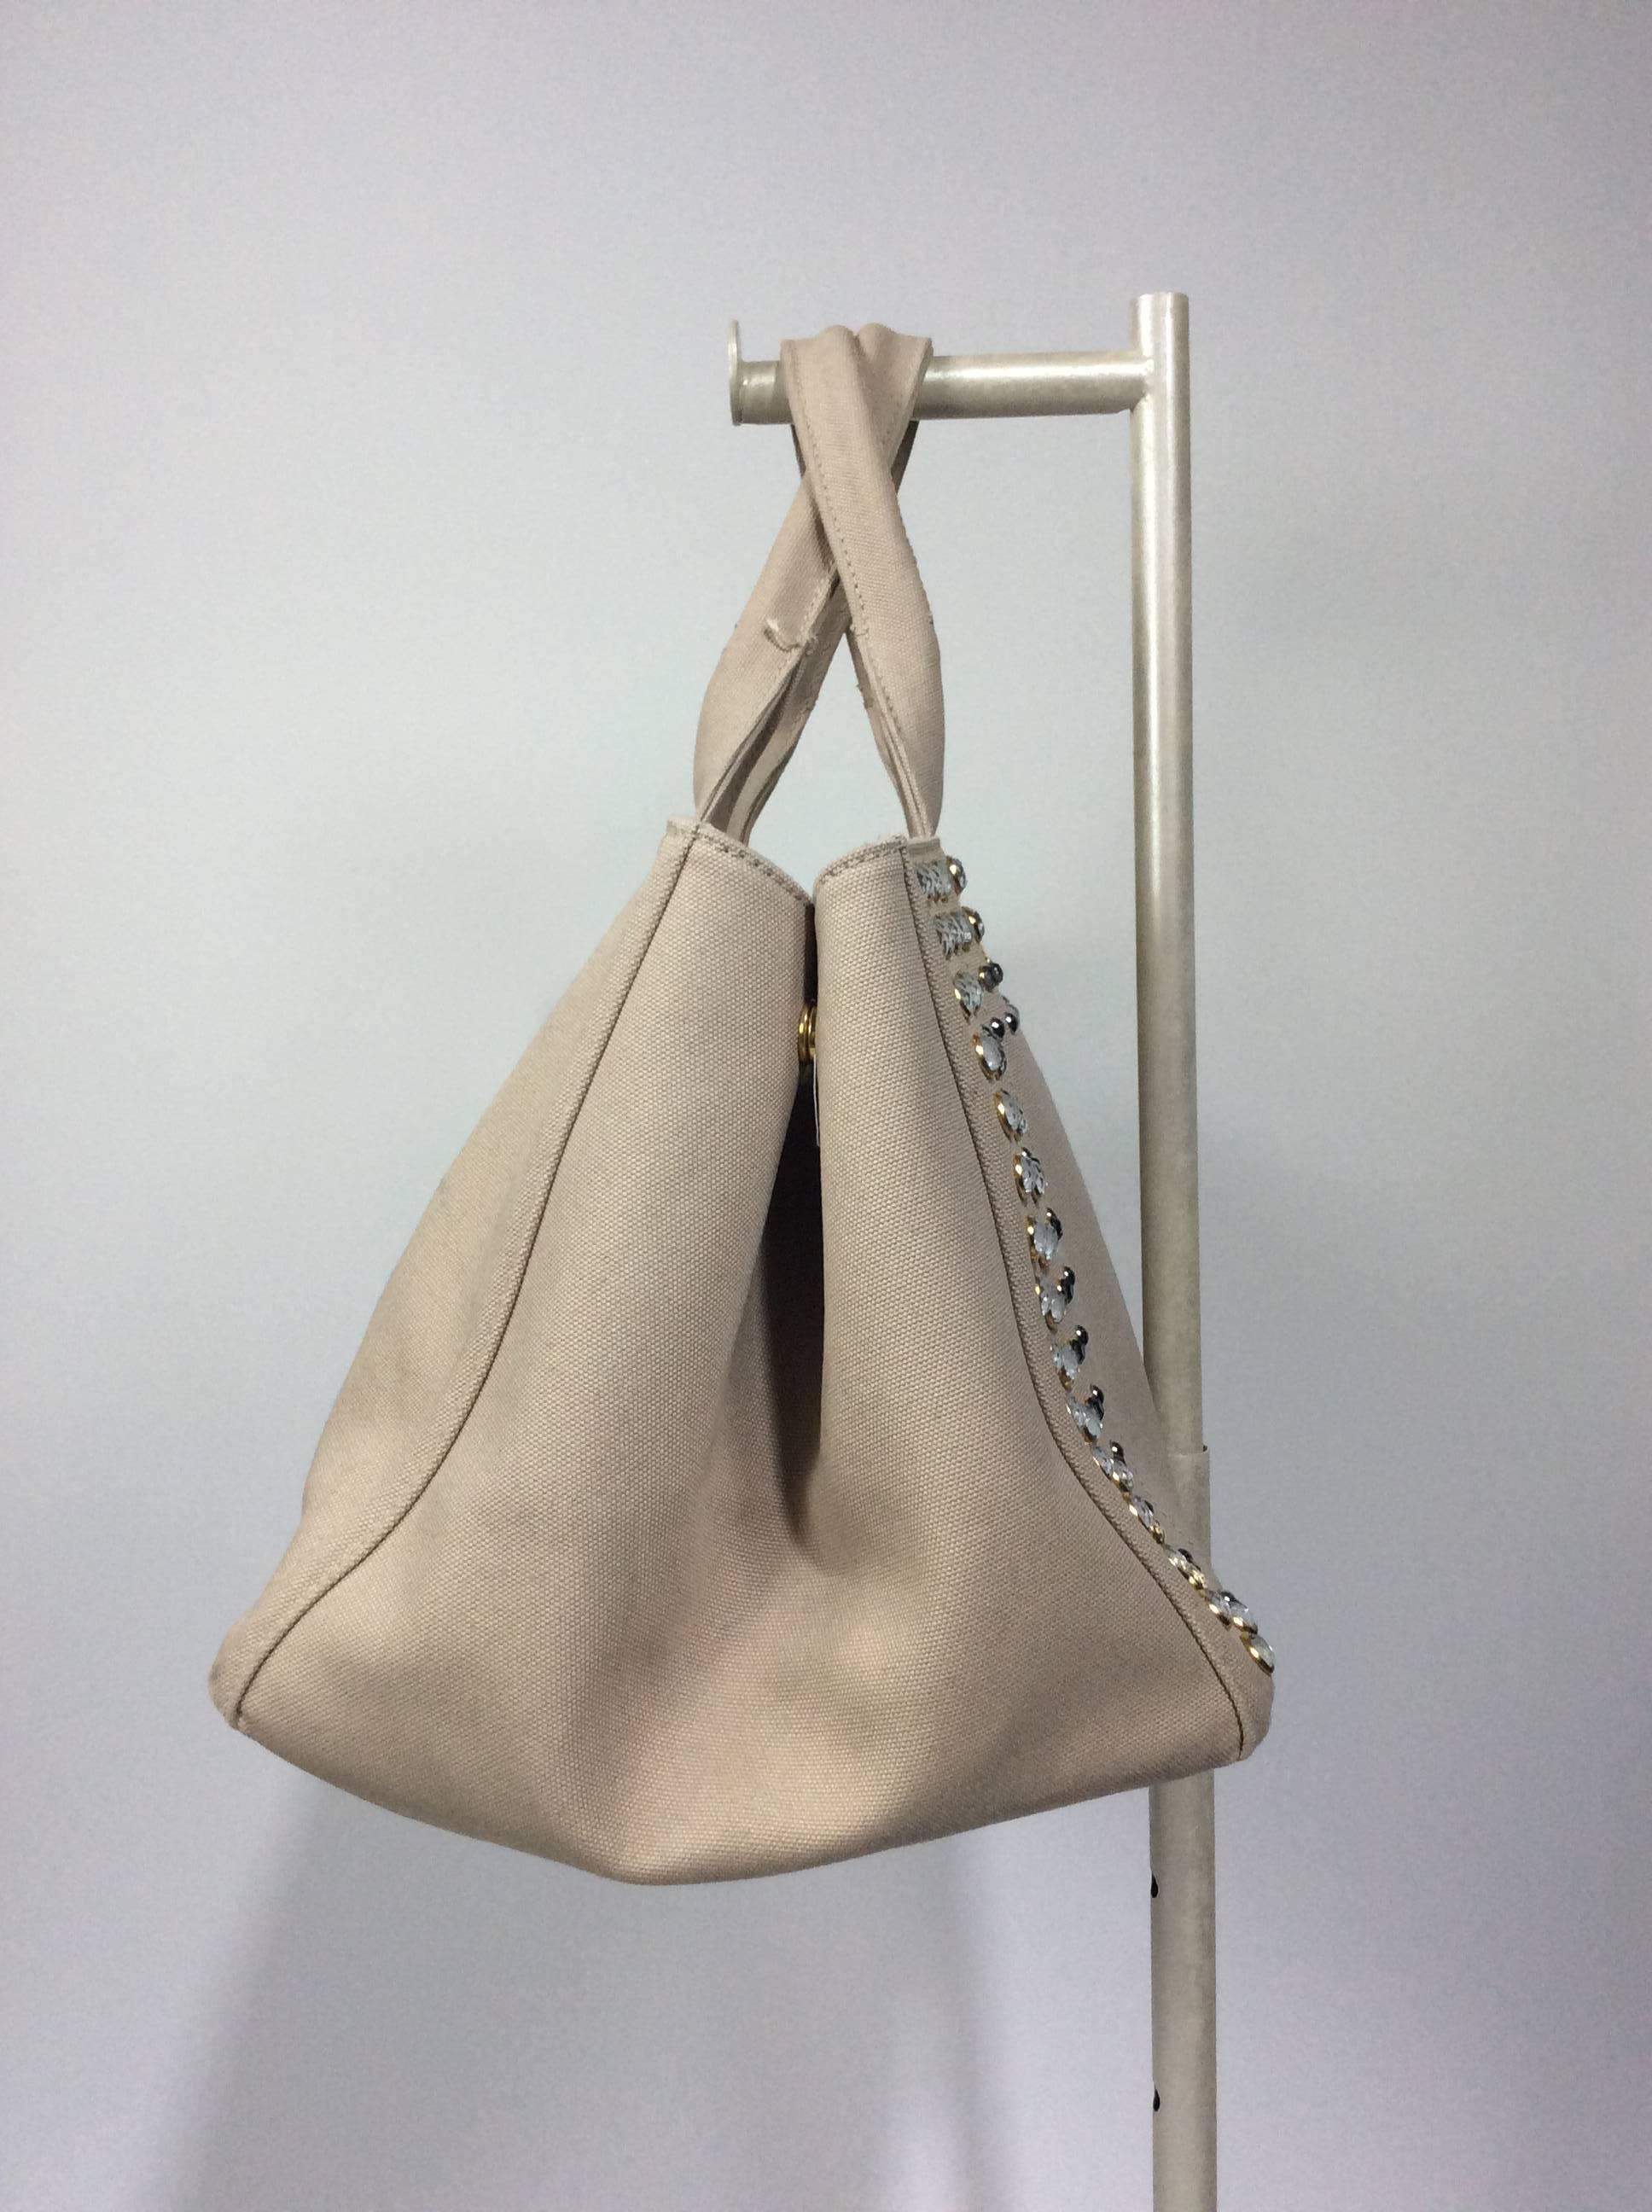 Prada Canvas Gardener's Tote  In Excellent Condition For Sale In Narberth, PA